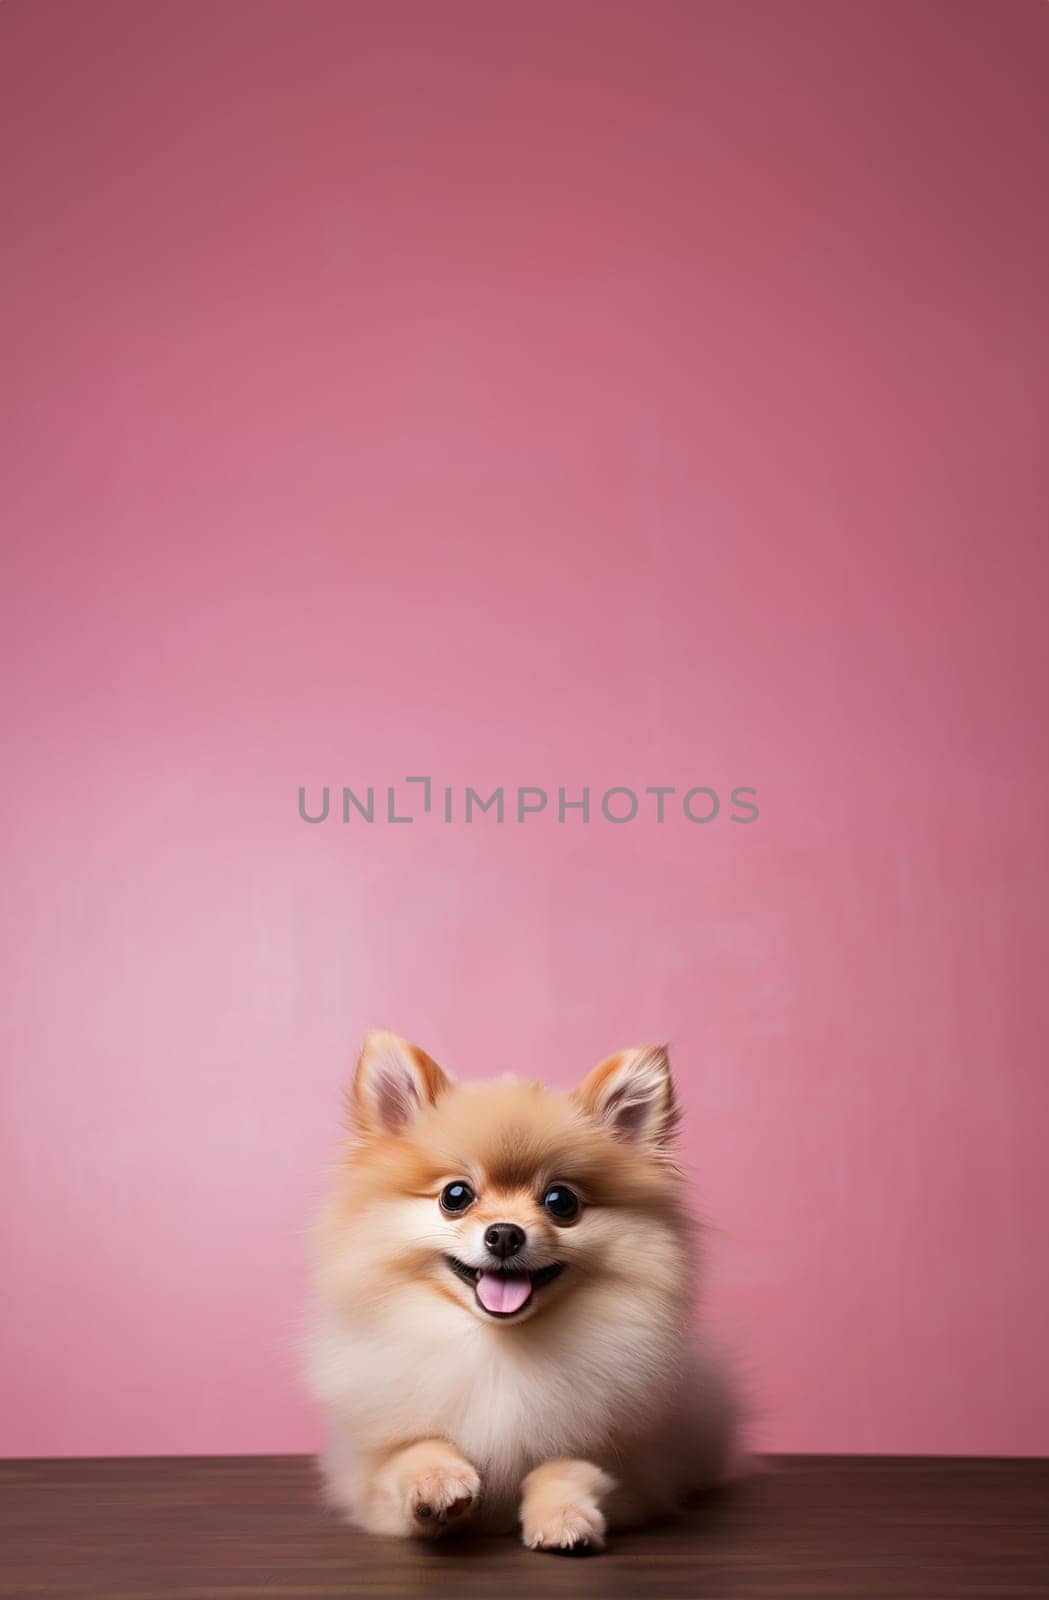 Cute friendly red fluffy spitz dog showing tongue on pink background, favorite Easter pet, copy space by KaterinaDalemans